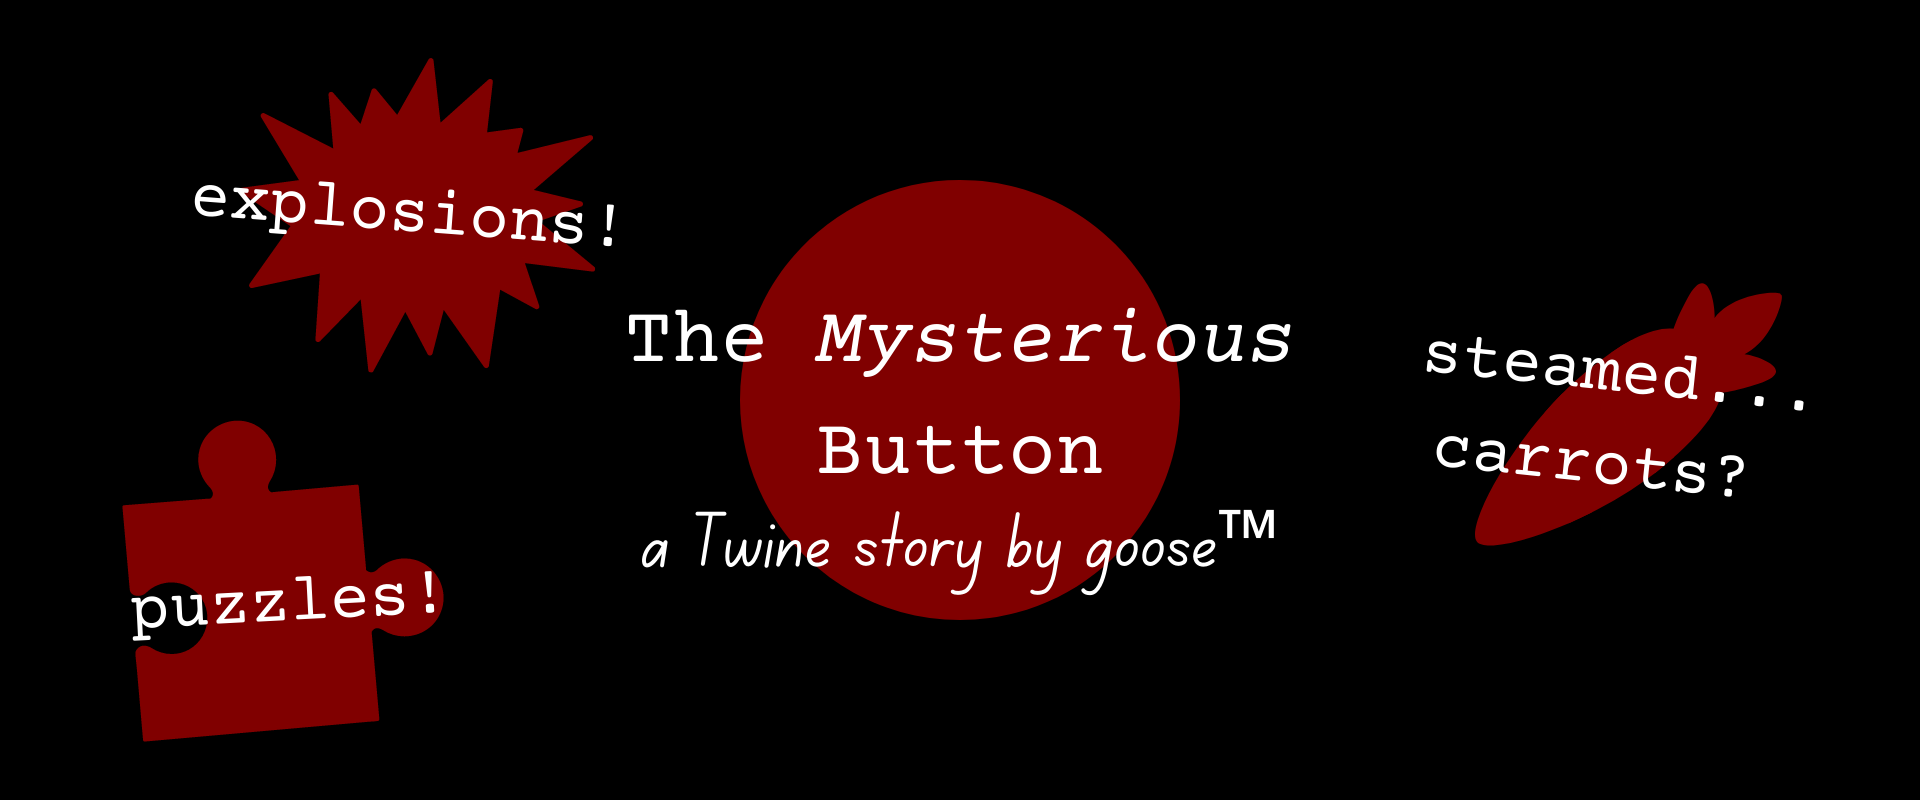 The Mysterious Button-a Twine story